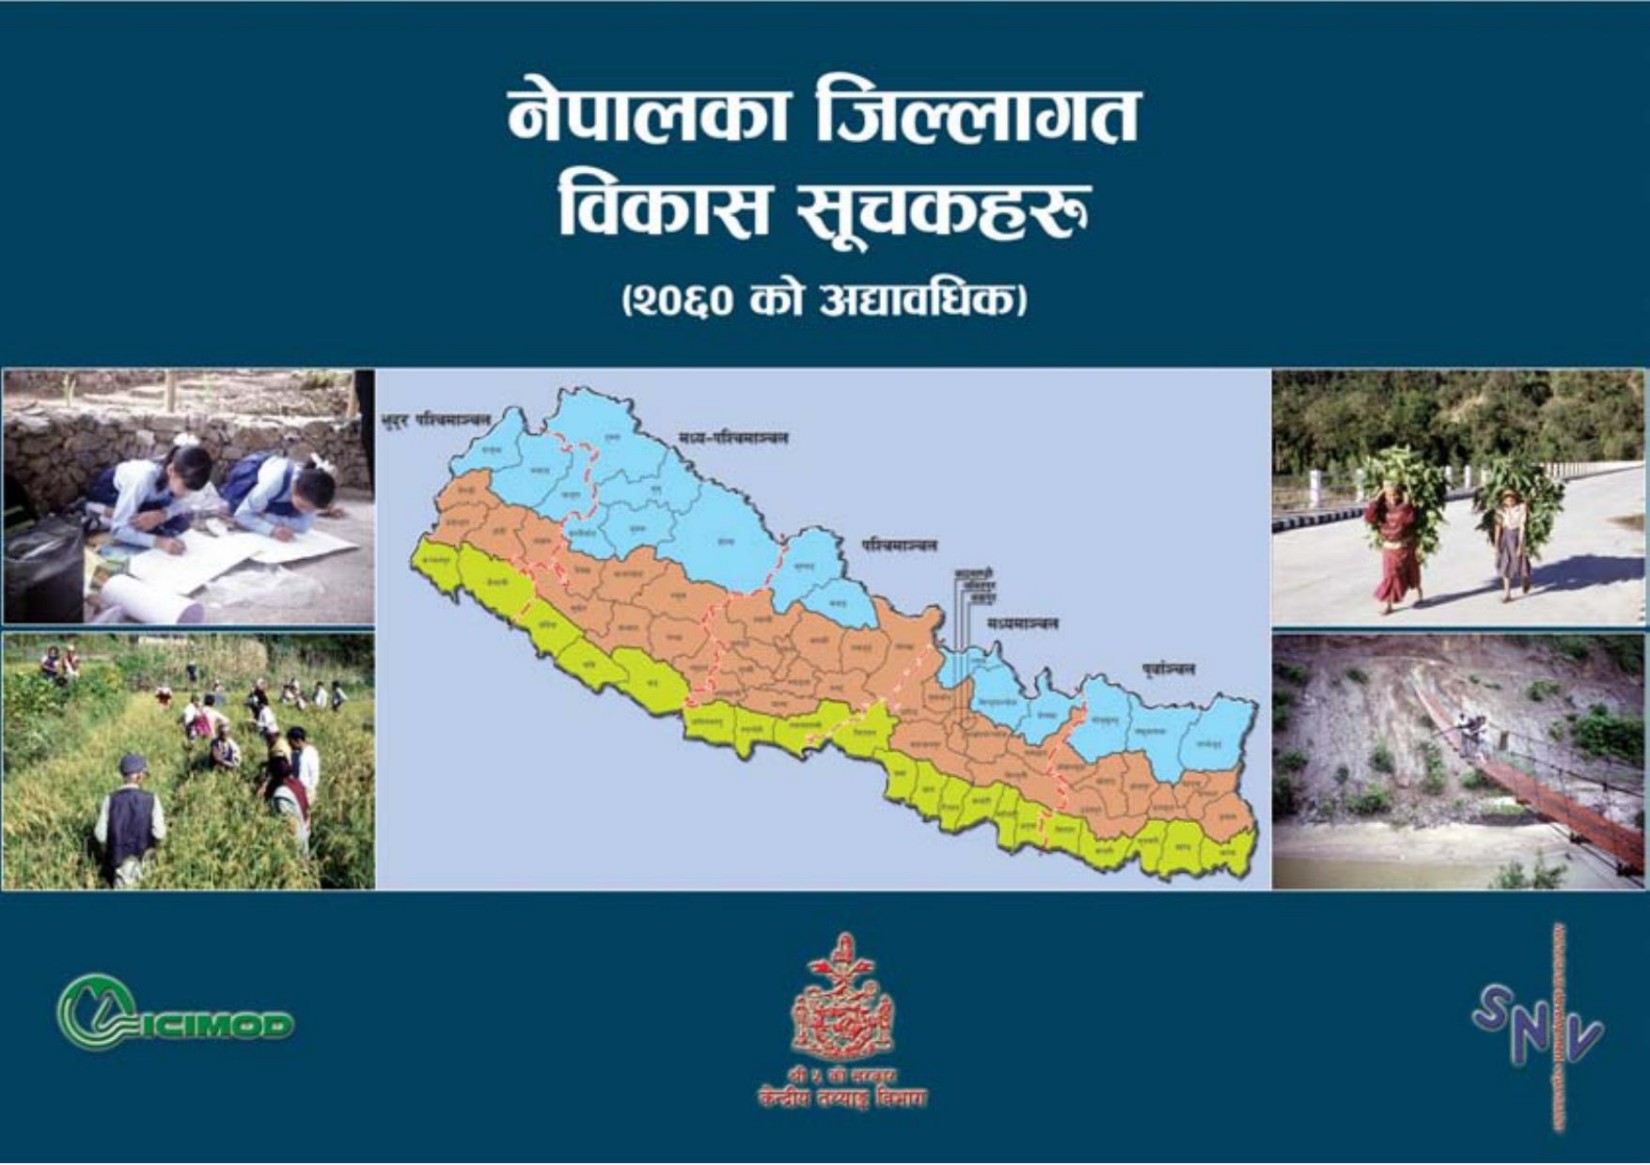 Indicators Of Development Of Districts Of Nepal